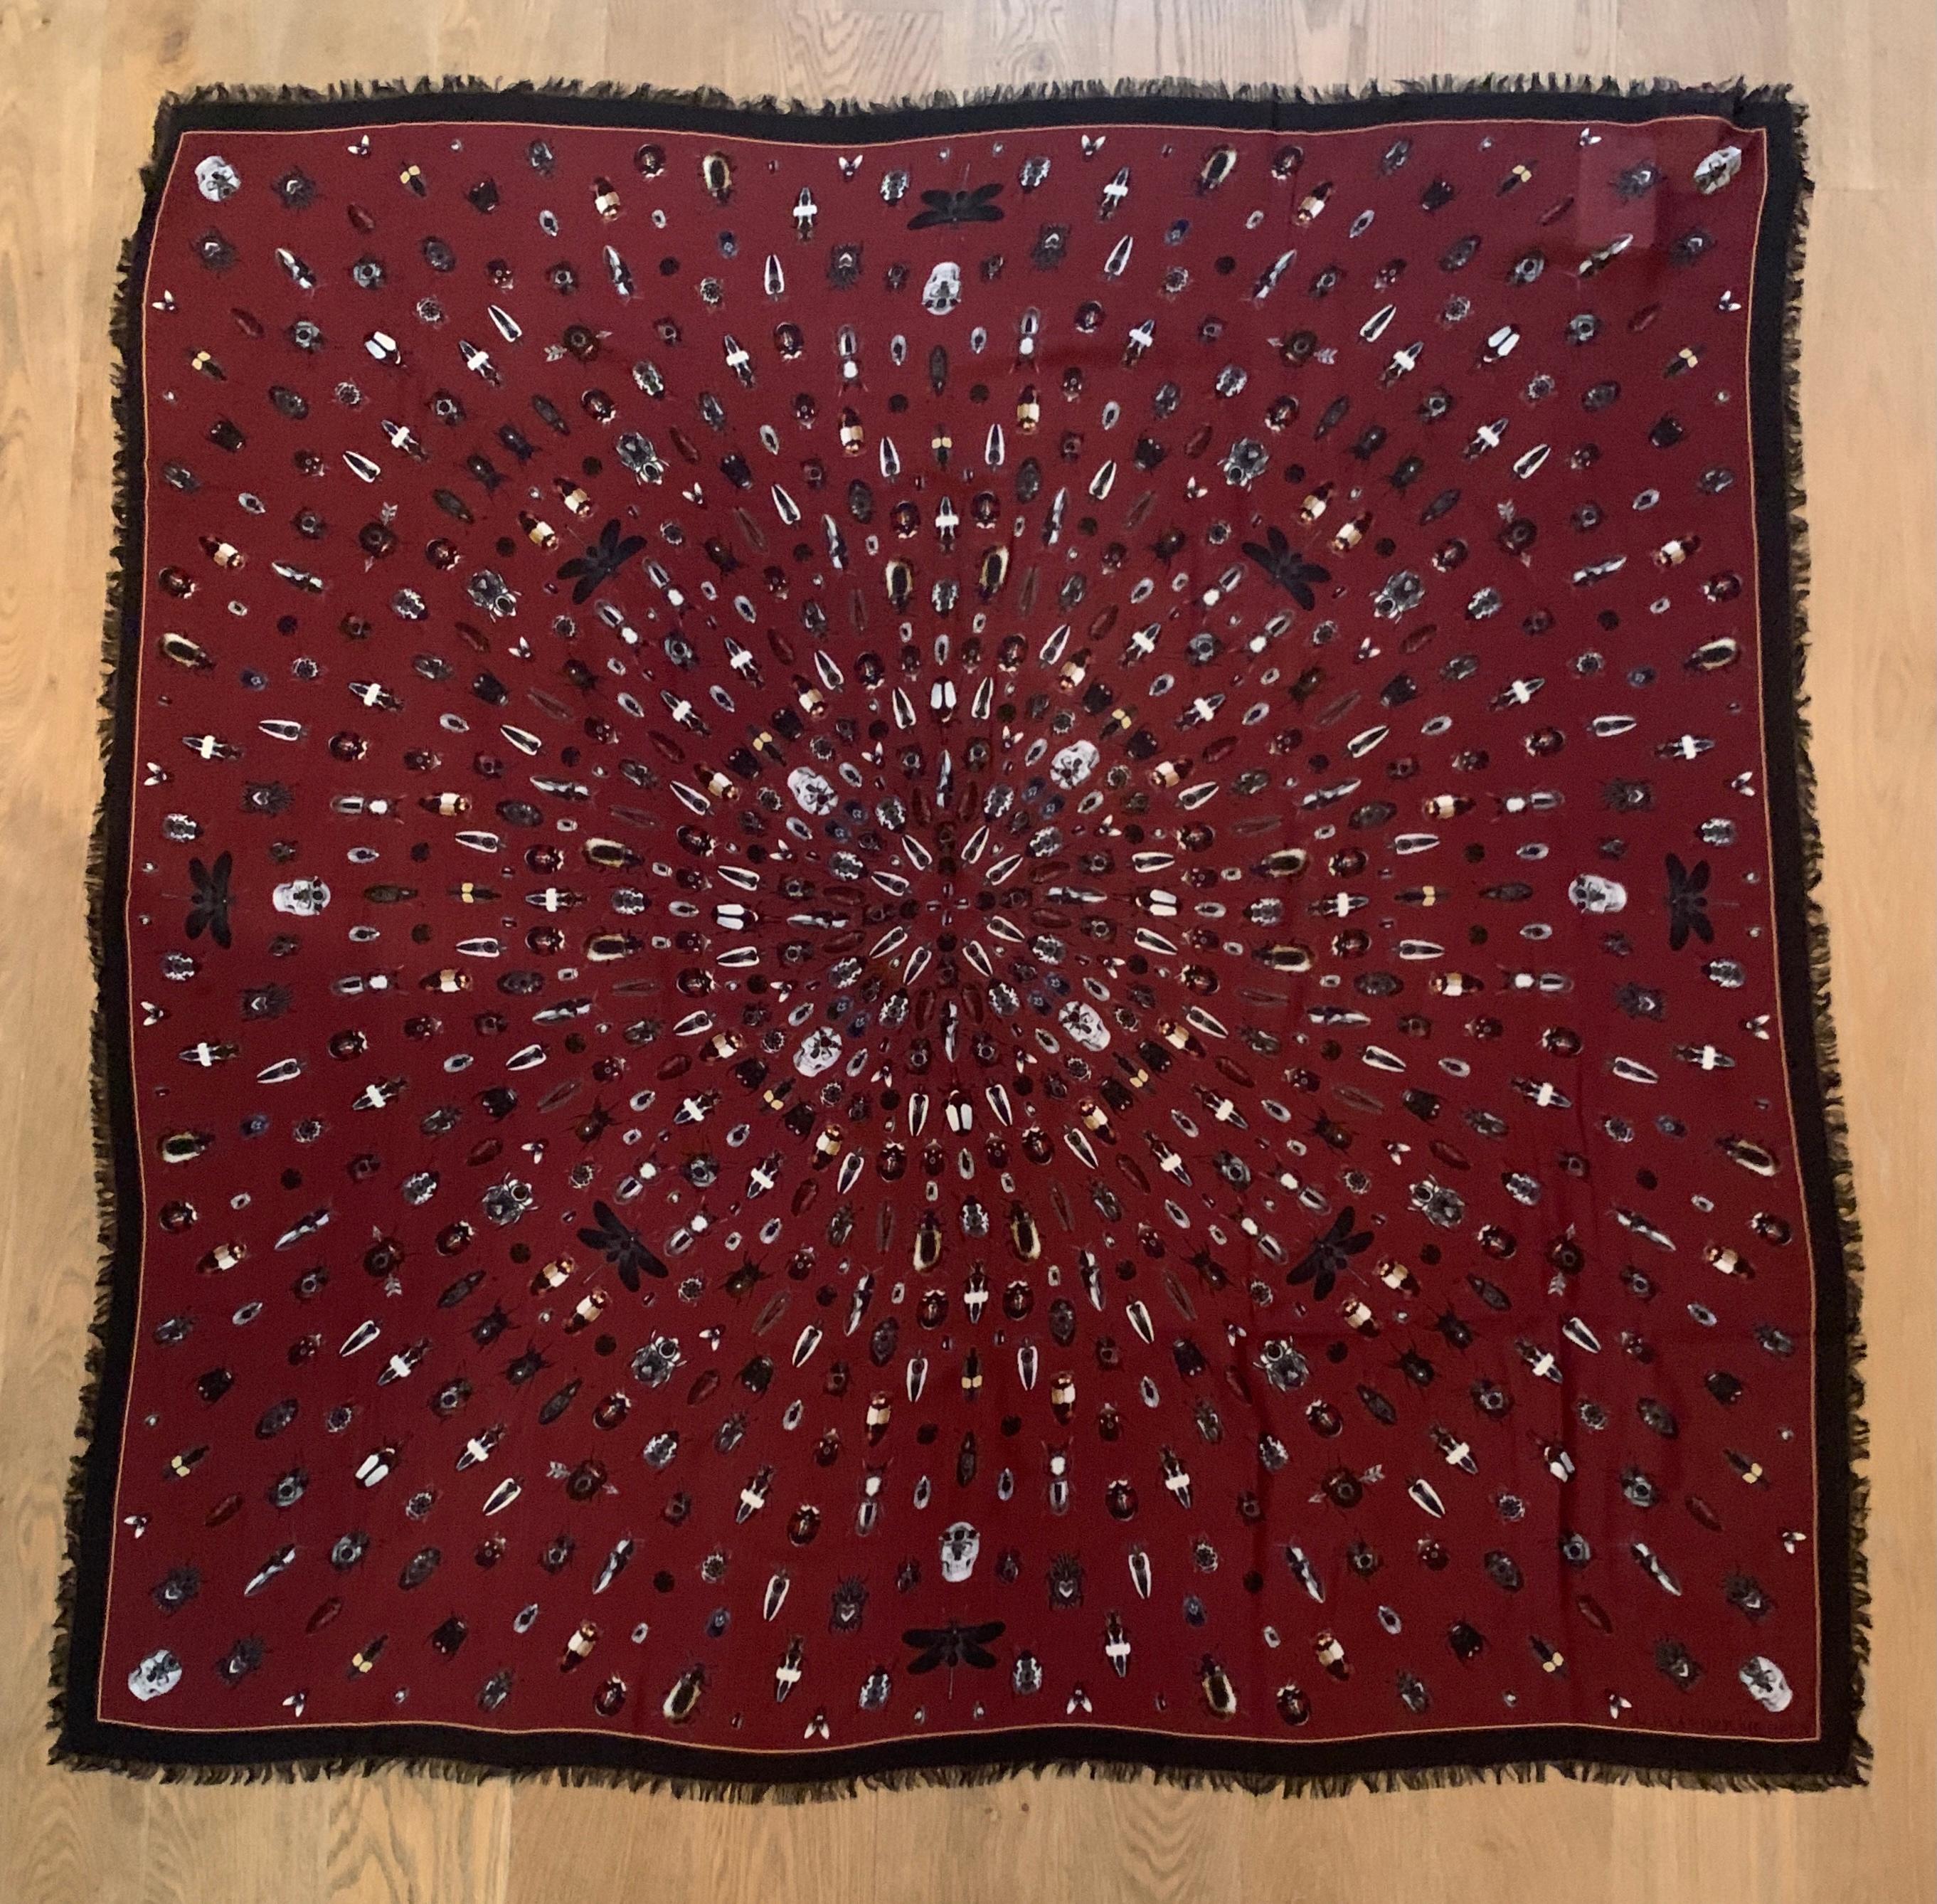 New Alexander McQueen large burgundy red and black scarf featuring insects and small skulls throughout. Dragonflies, beetles, flies and more, some adorned in a jewel print! Fringed edges.

Large size makes it great for a sarong or pool cover up!